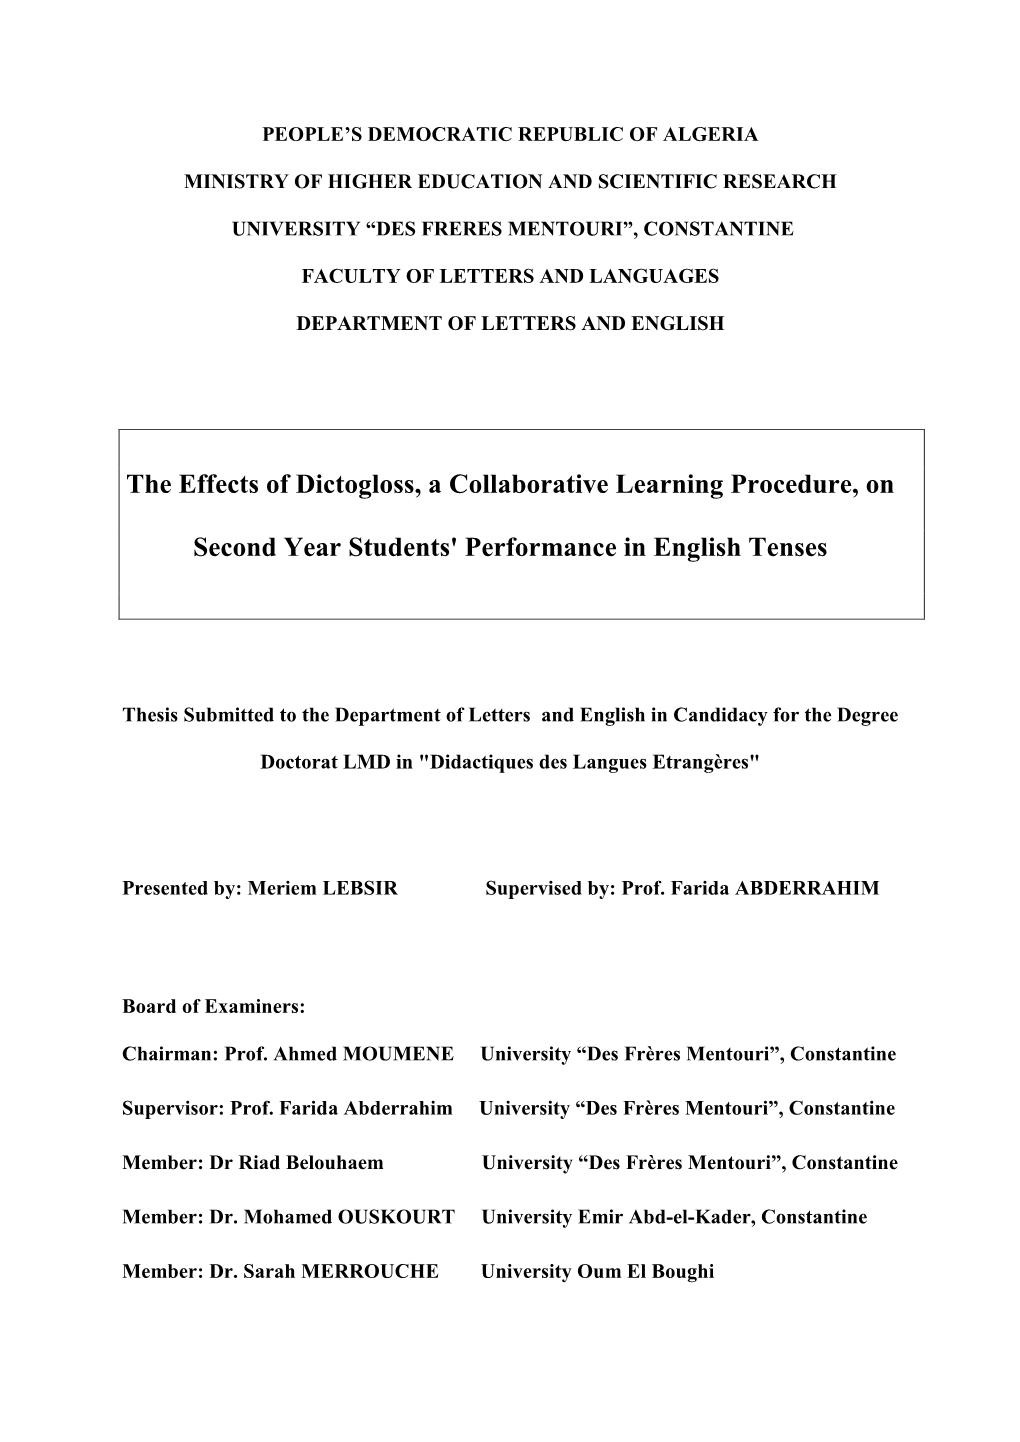 The Effects of Dictogloss, a Collaborative Learning Procedure, on Second Year Students' Performance in English Tenses